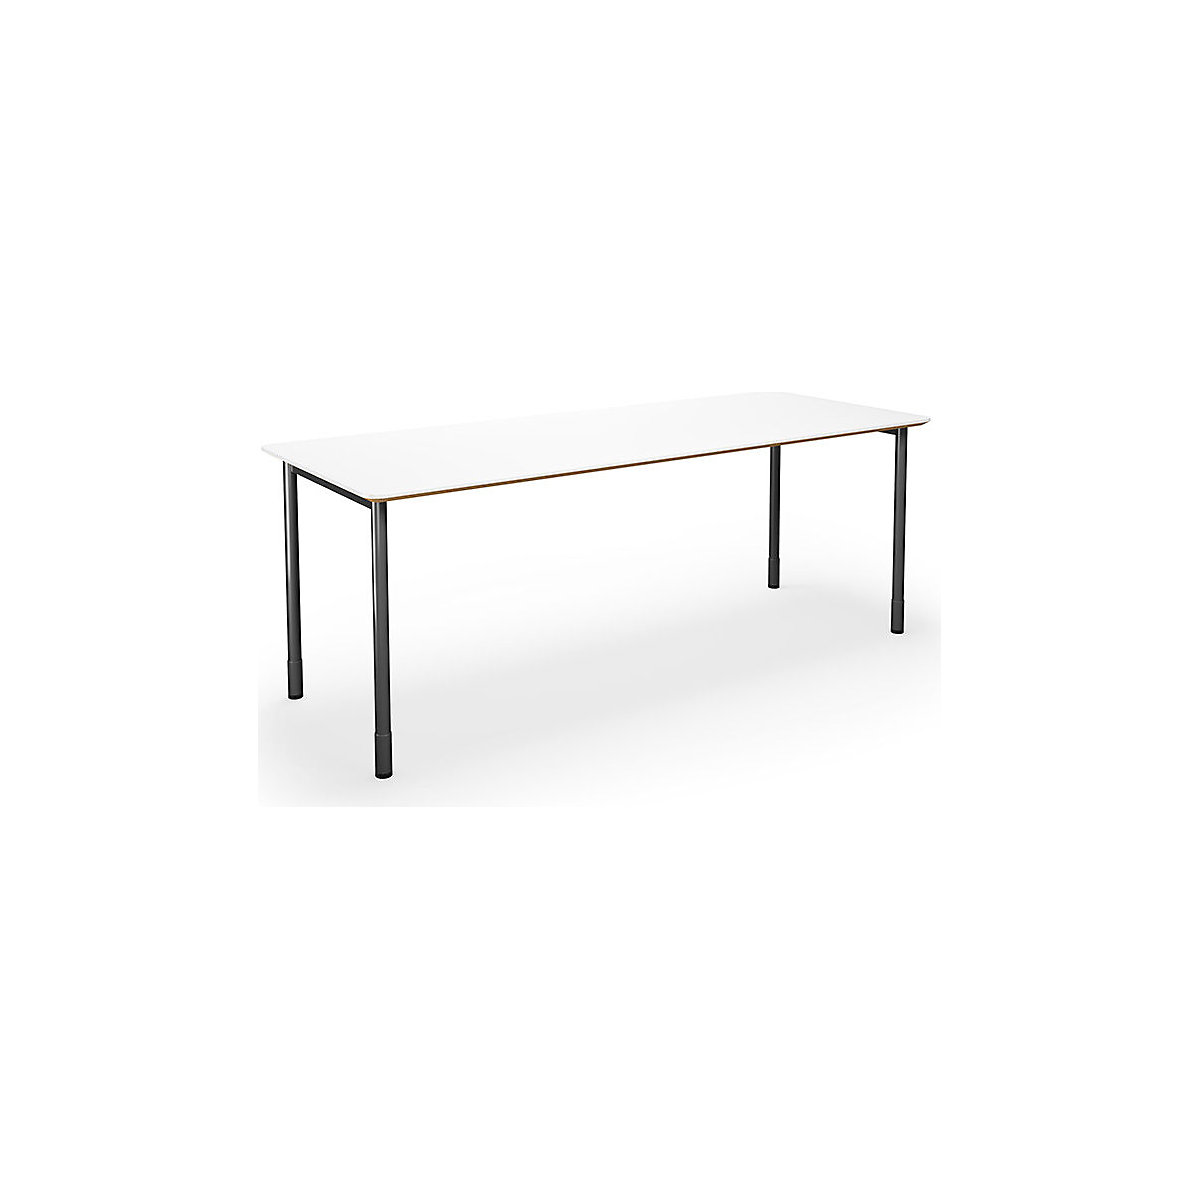 DUO-C Trend multi-purpose desk, straight tabletop, rounded corners, WxD 1800 x 800 mm, white, black-1